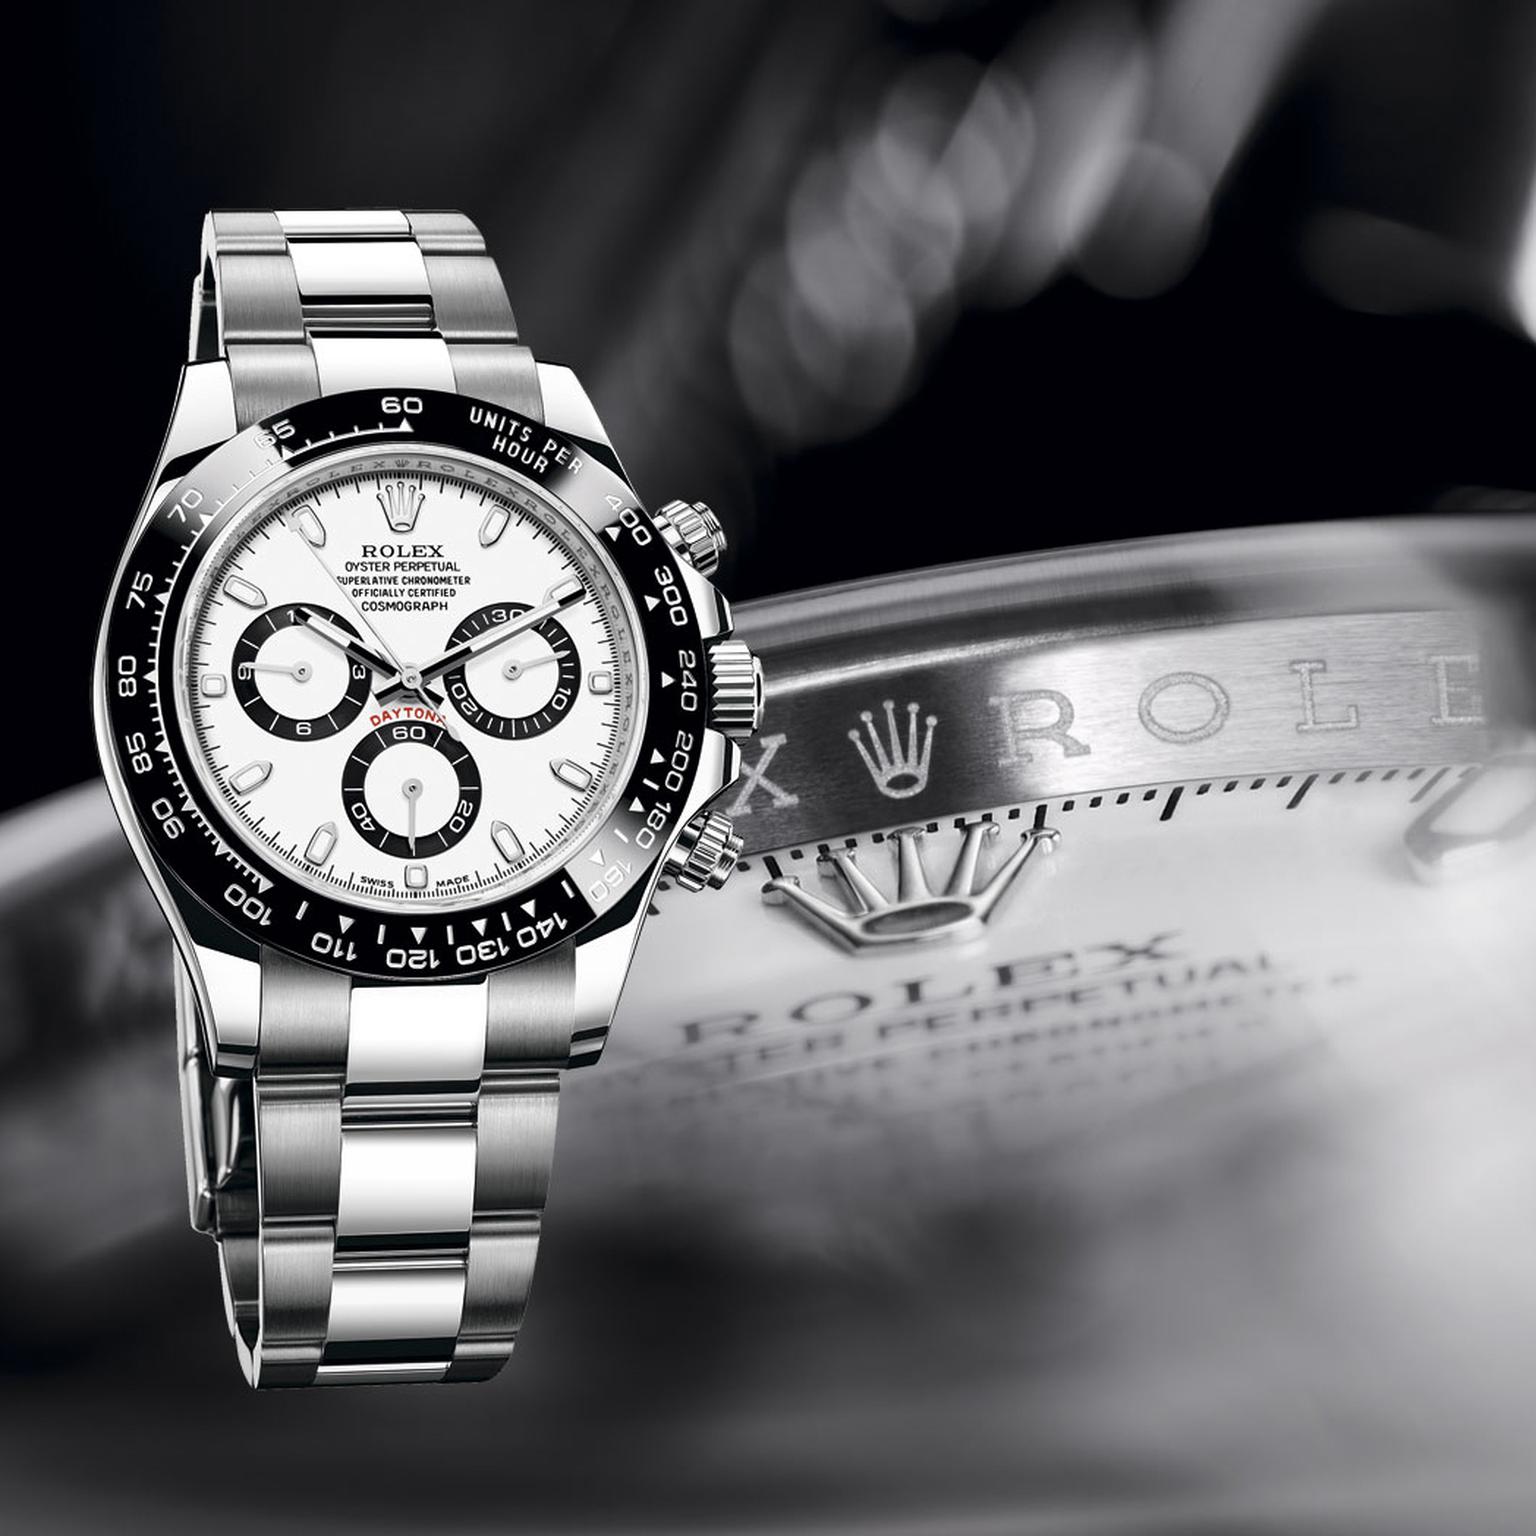 Is It Safe to Buy a Watch From ? - The Truth About Watches